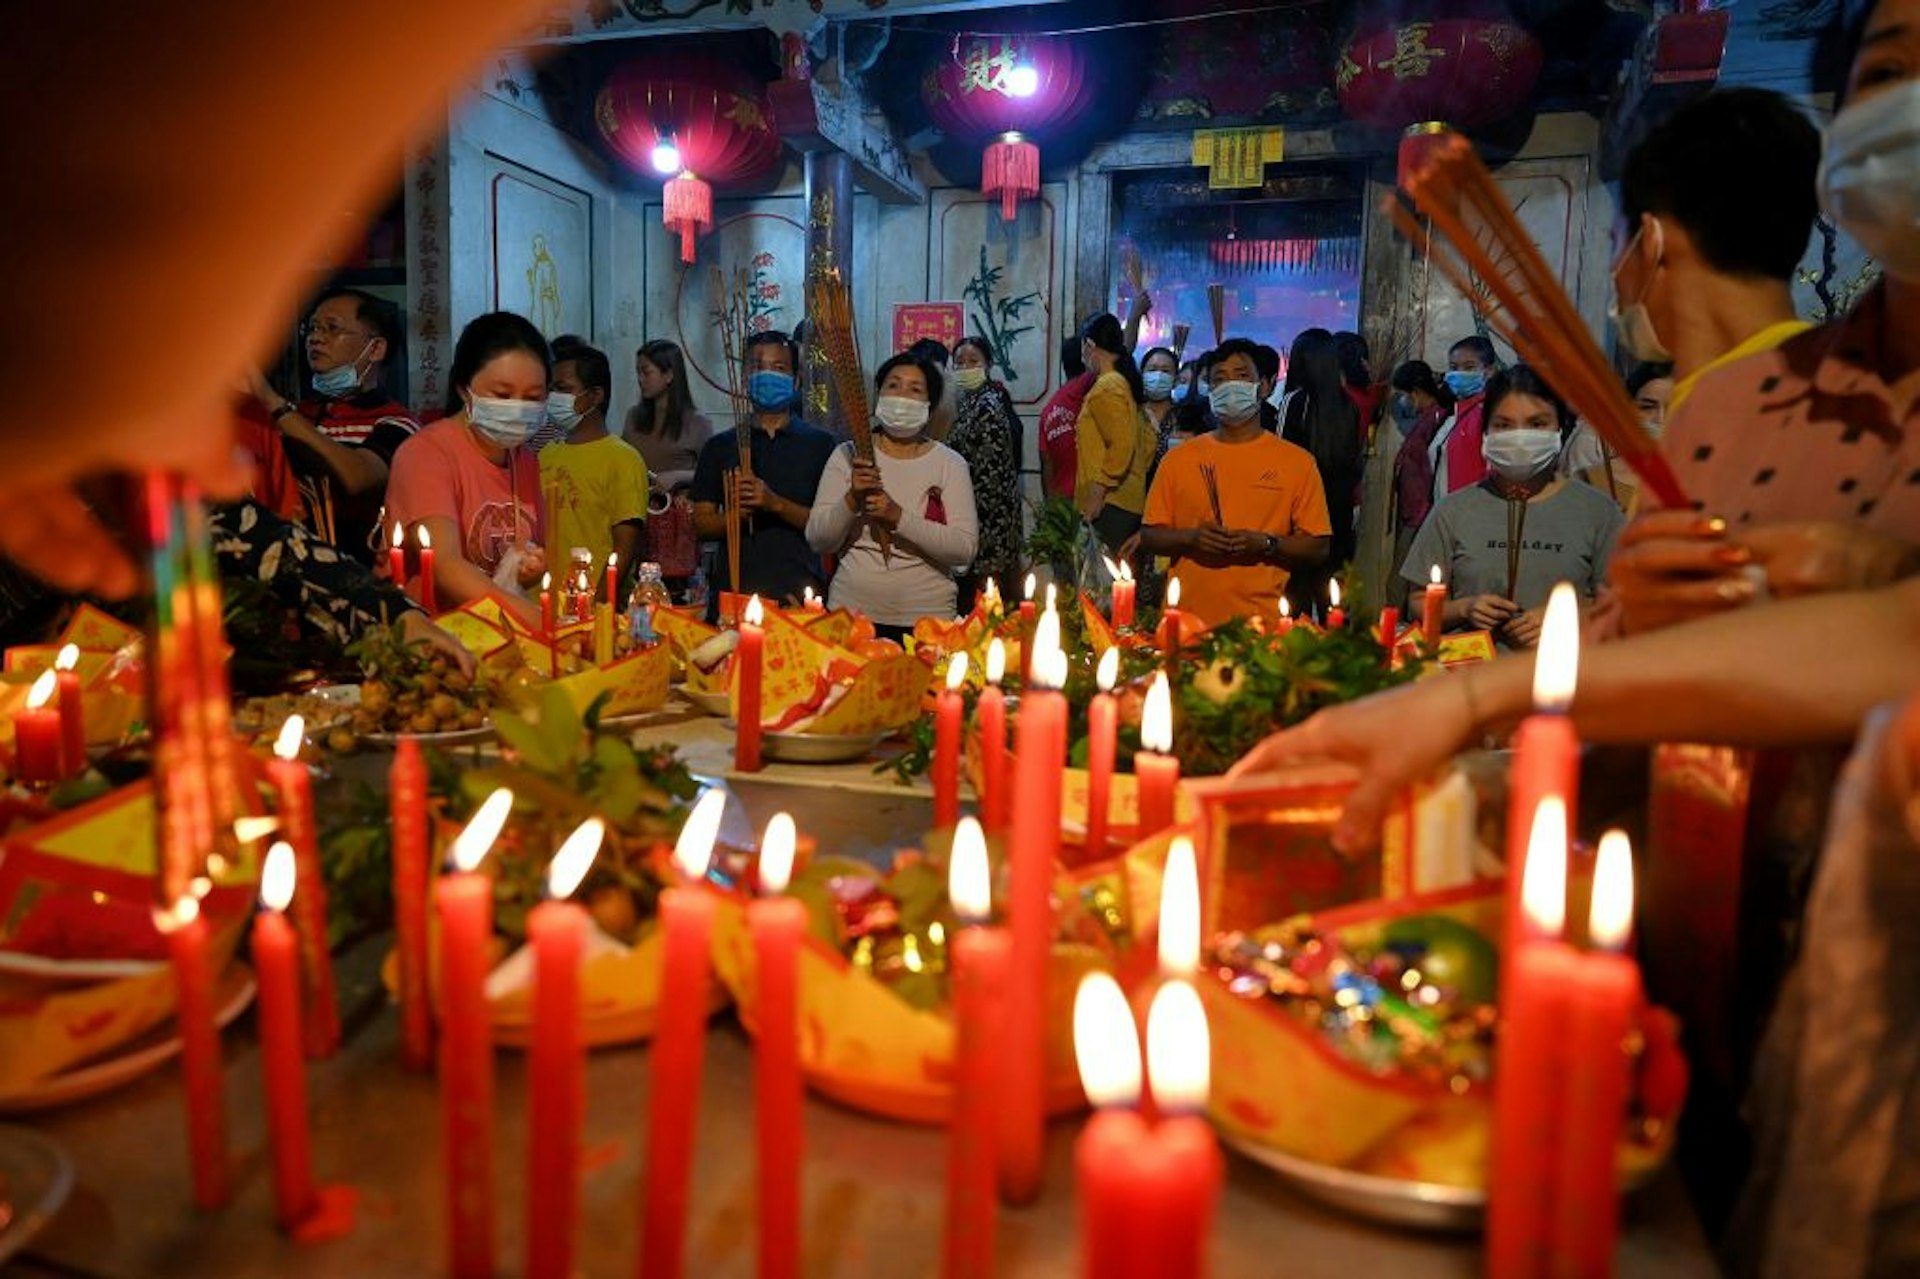 Devotees pray at a temple to mark the start of the Lunar New Year in Ta Khmao, Kandal province on February 12, 2021.